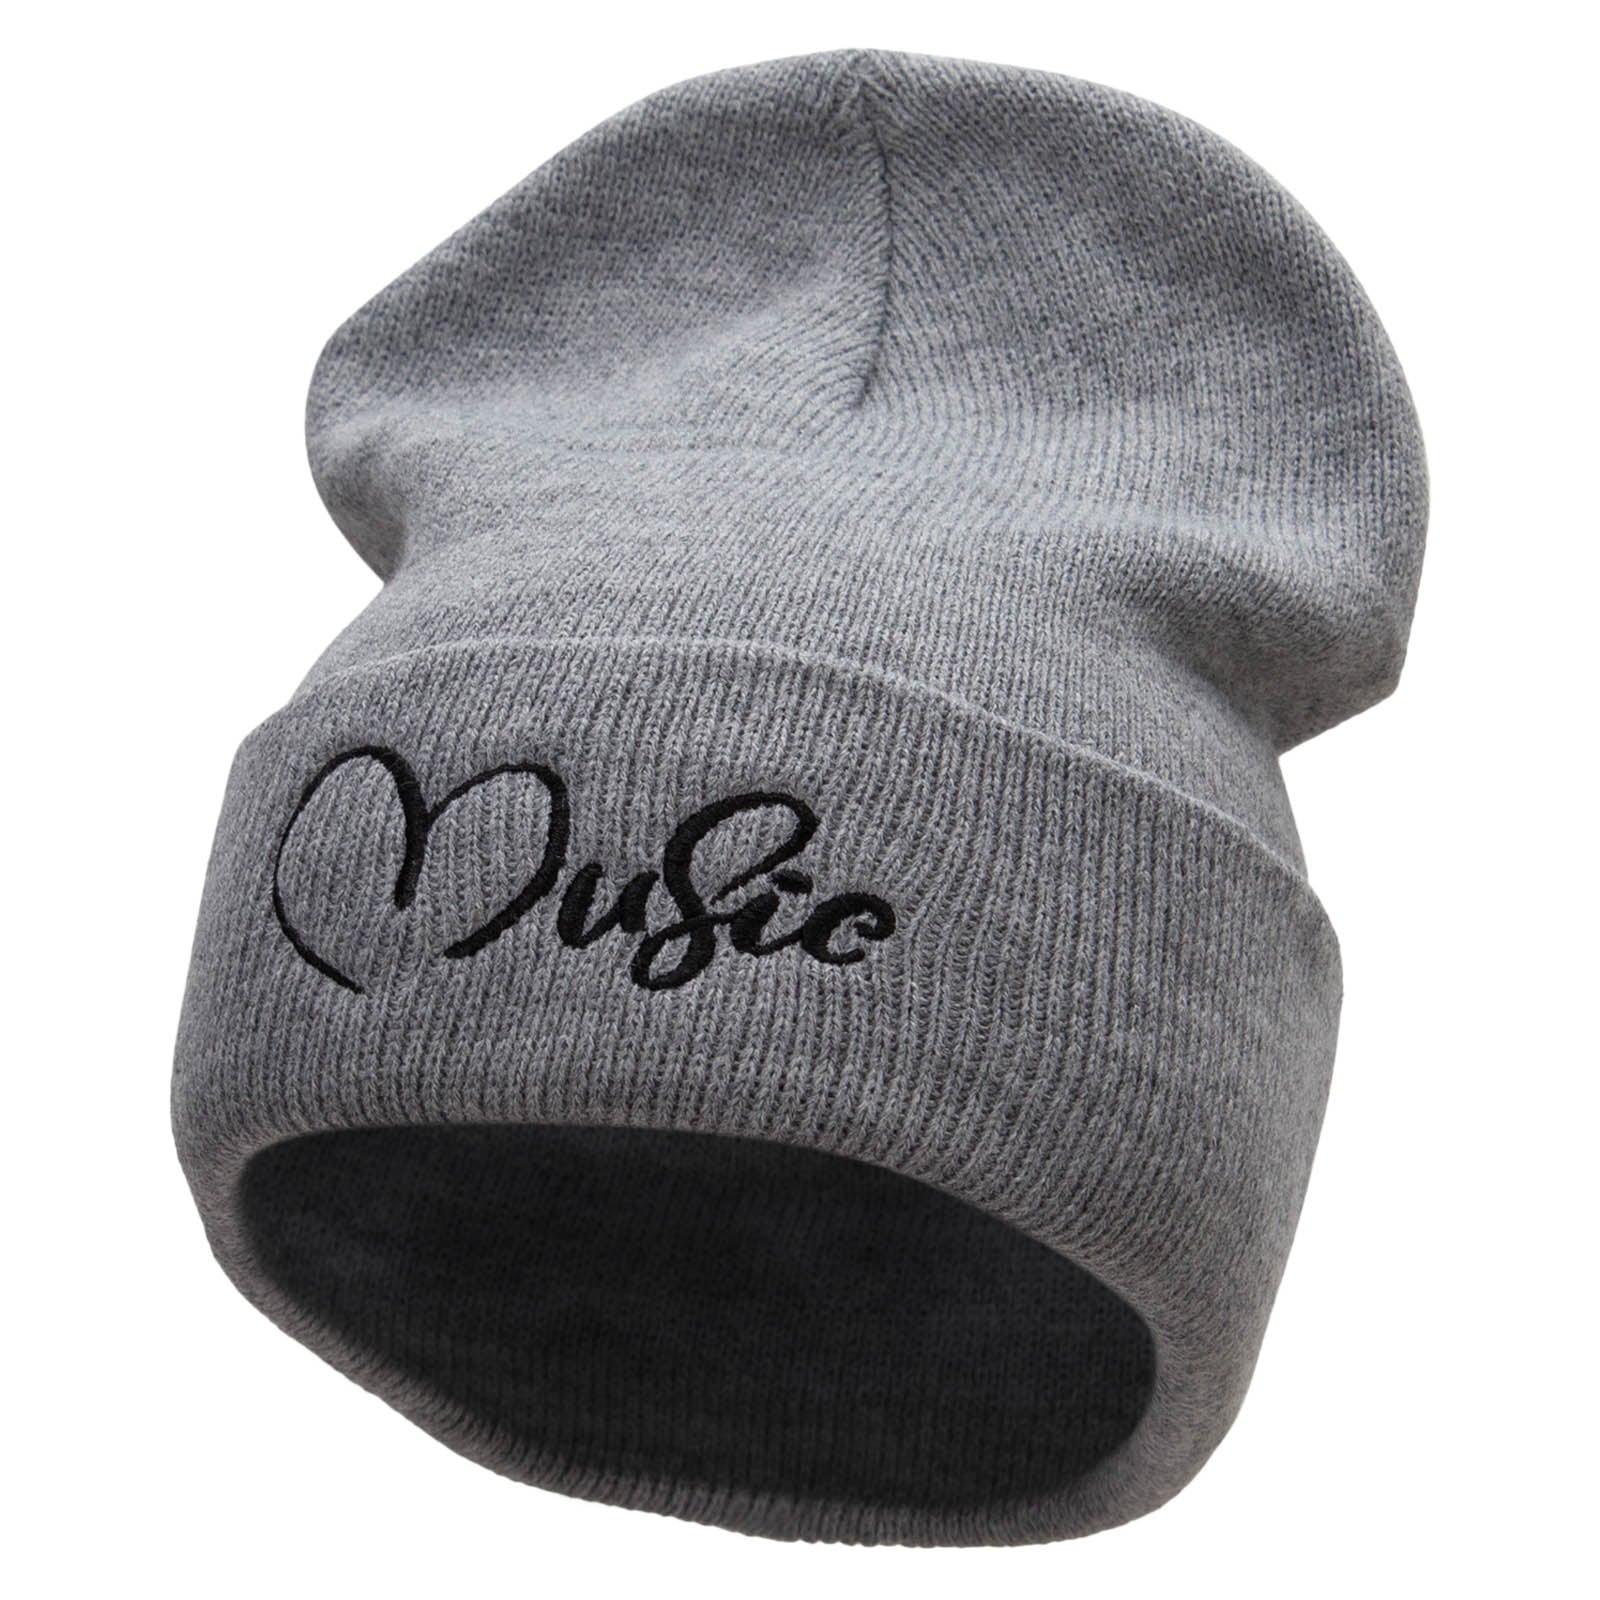 Music Calligraphy Embroidered 12 Inch Long Knitted Beanie - Heather Grey OSFM